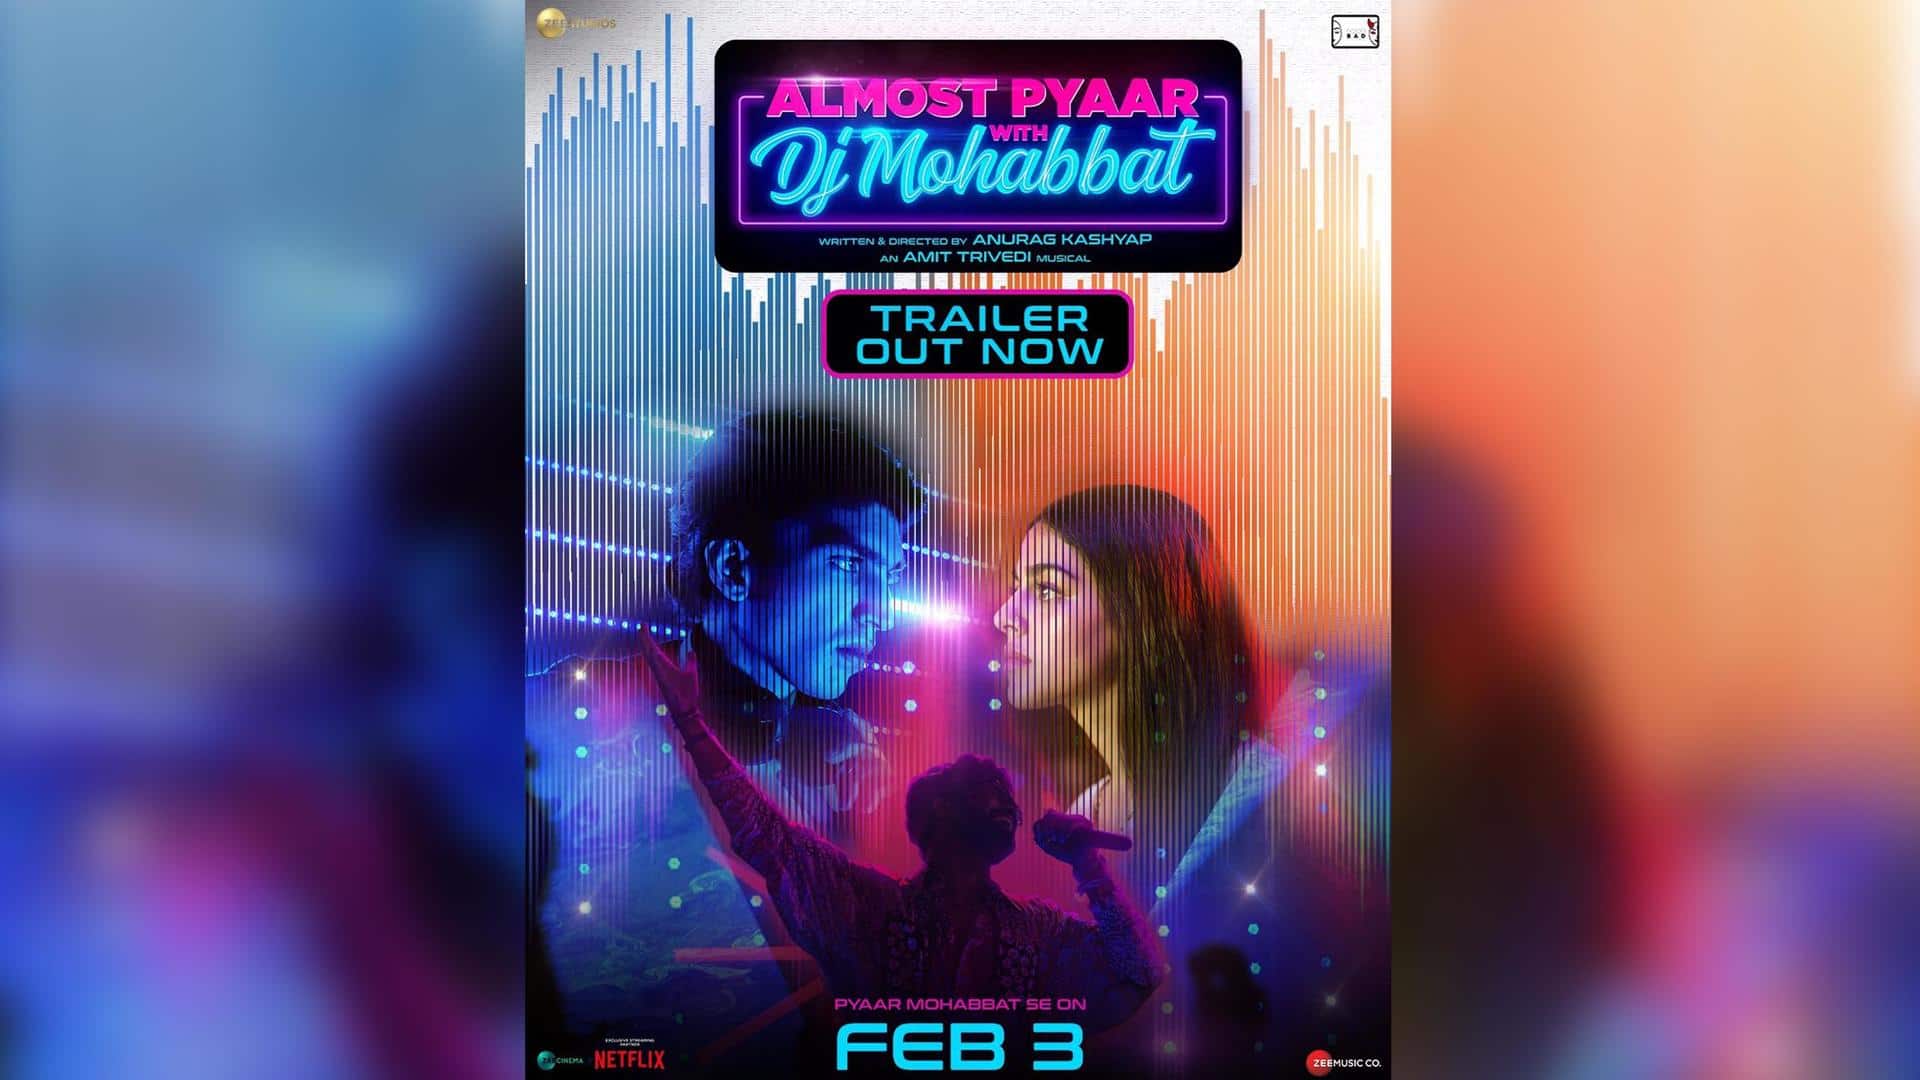 'Almost Pyaar with DJ Mohabbat' trailer features star-crossed lovers' romance